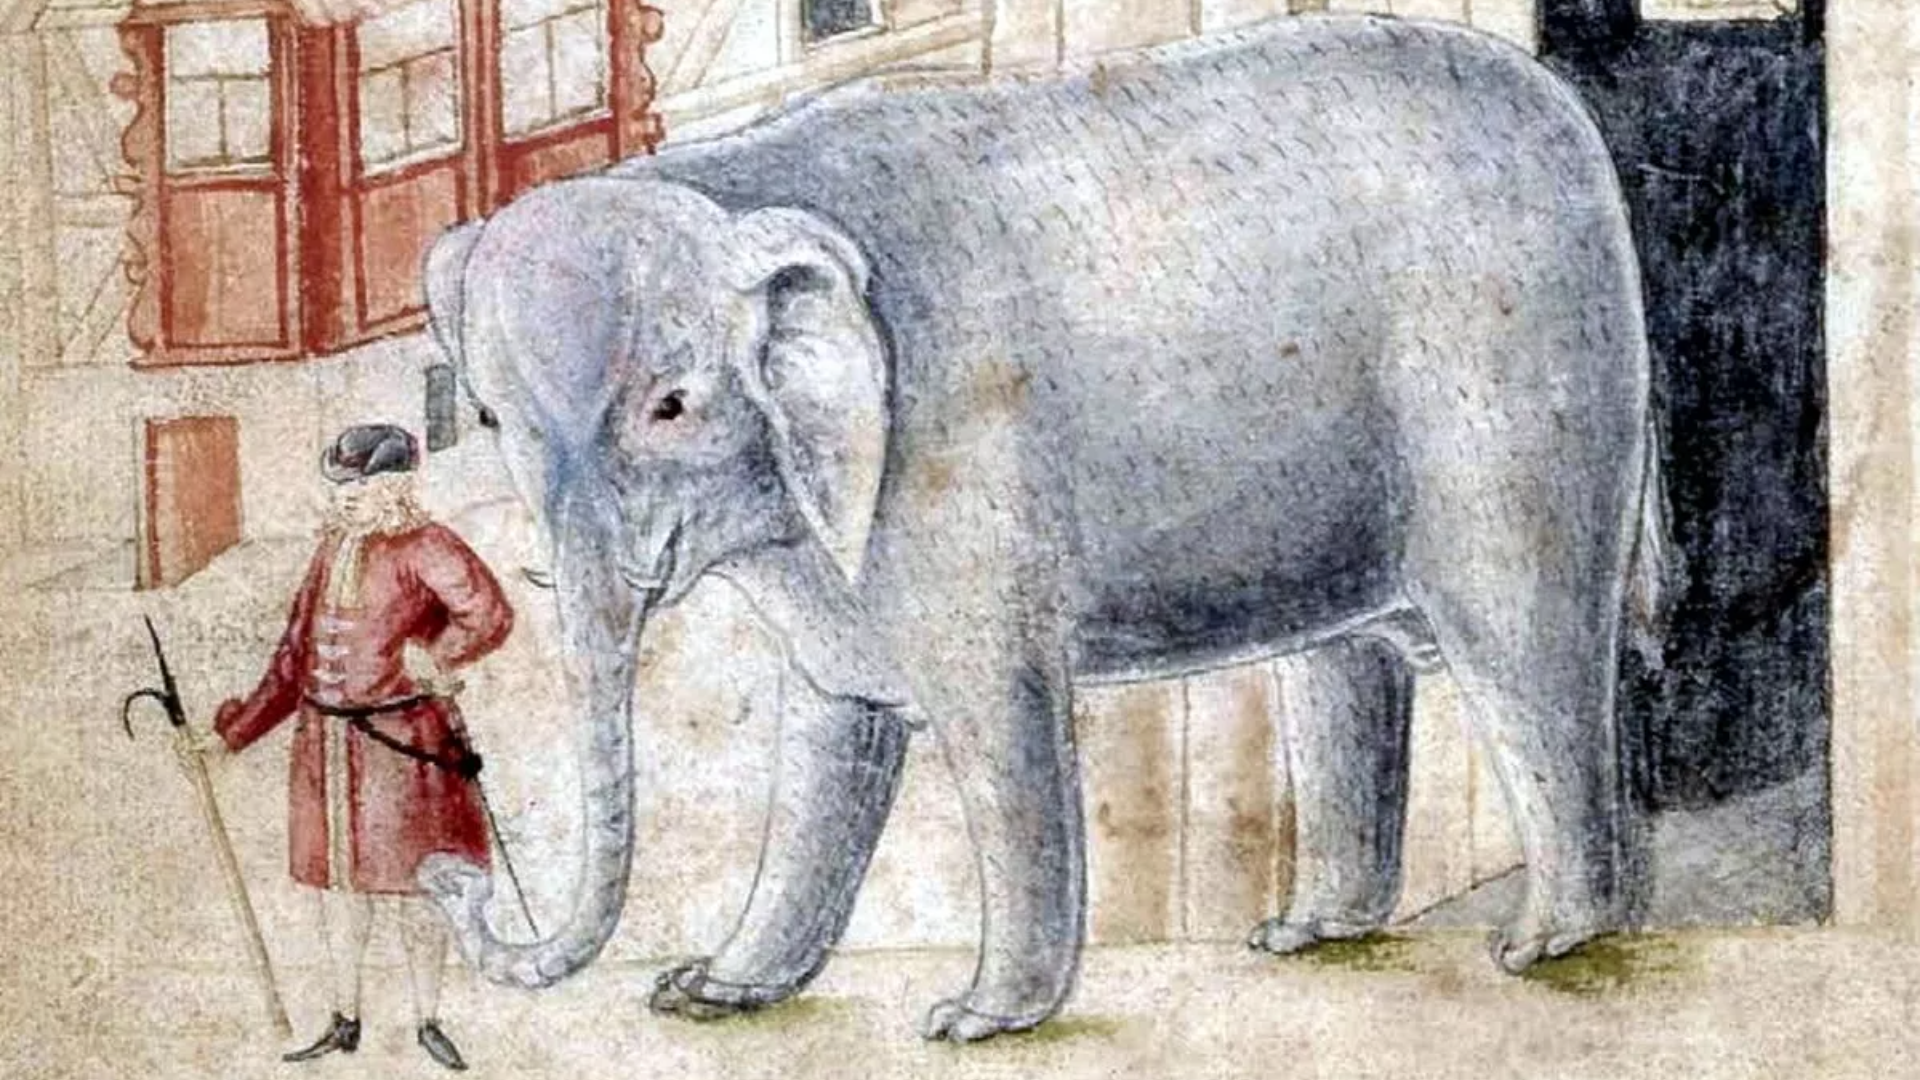 A drawing of an elephant, a statue of Greyfriars Bobby, and a statue of a man with a dog at his feet. 